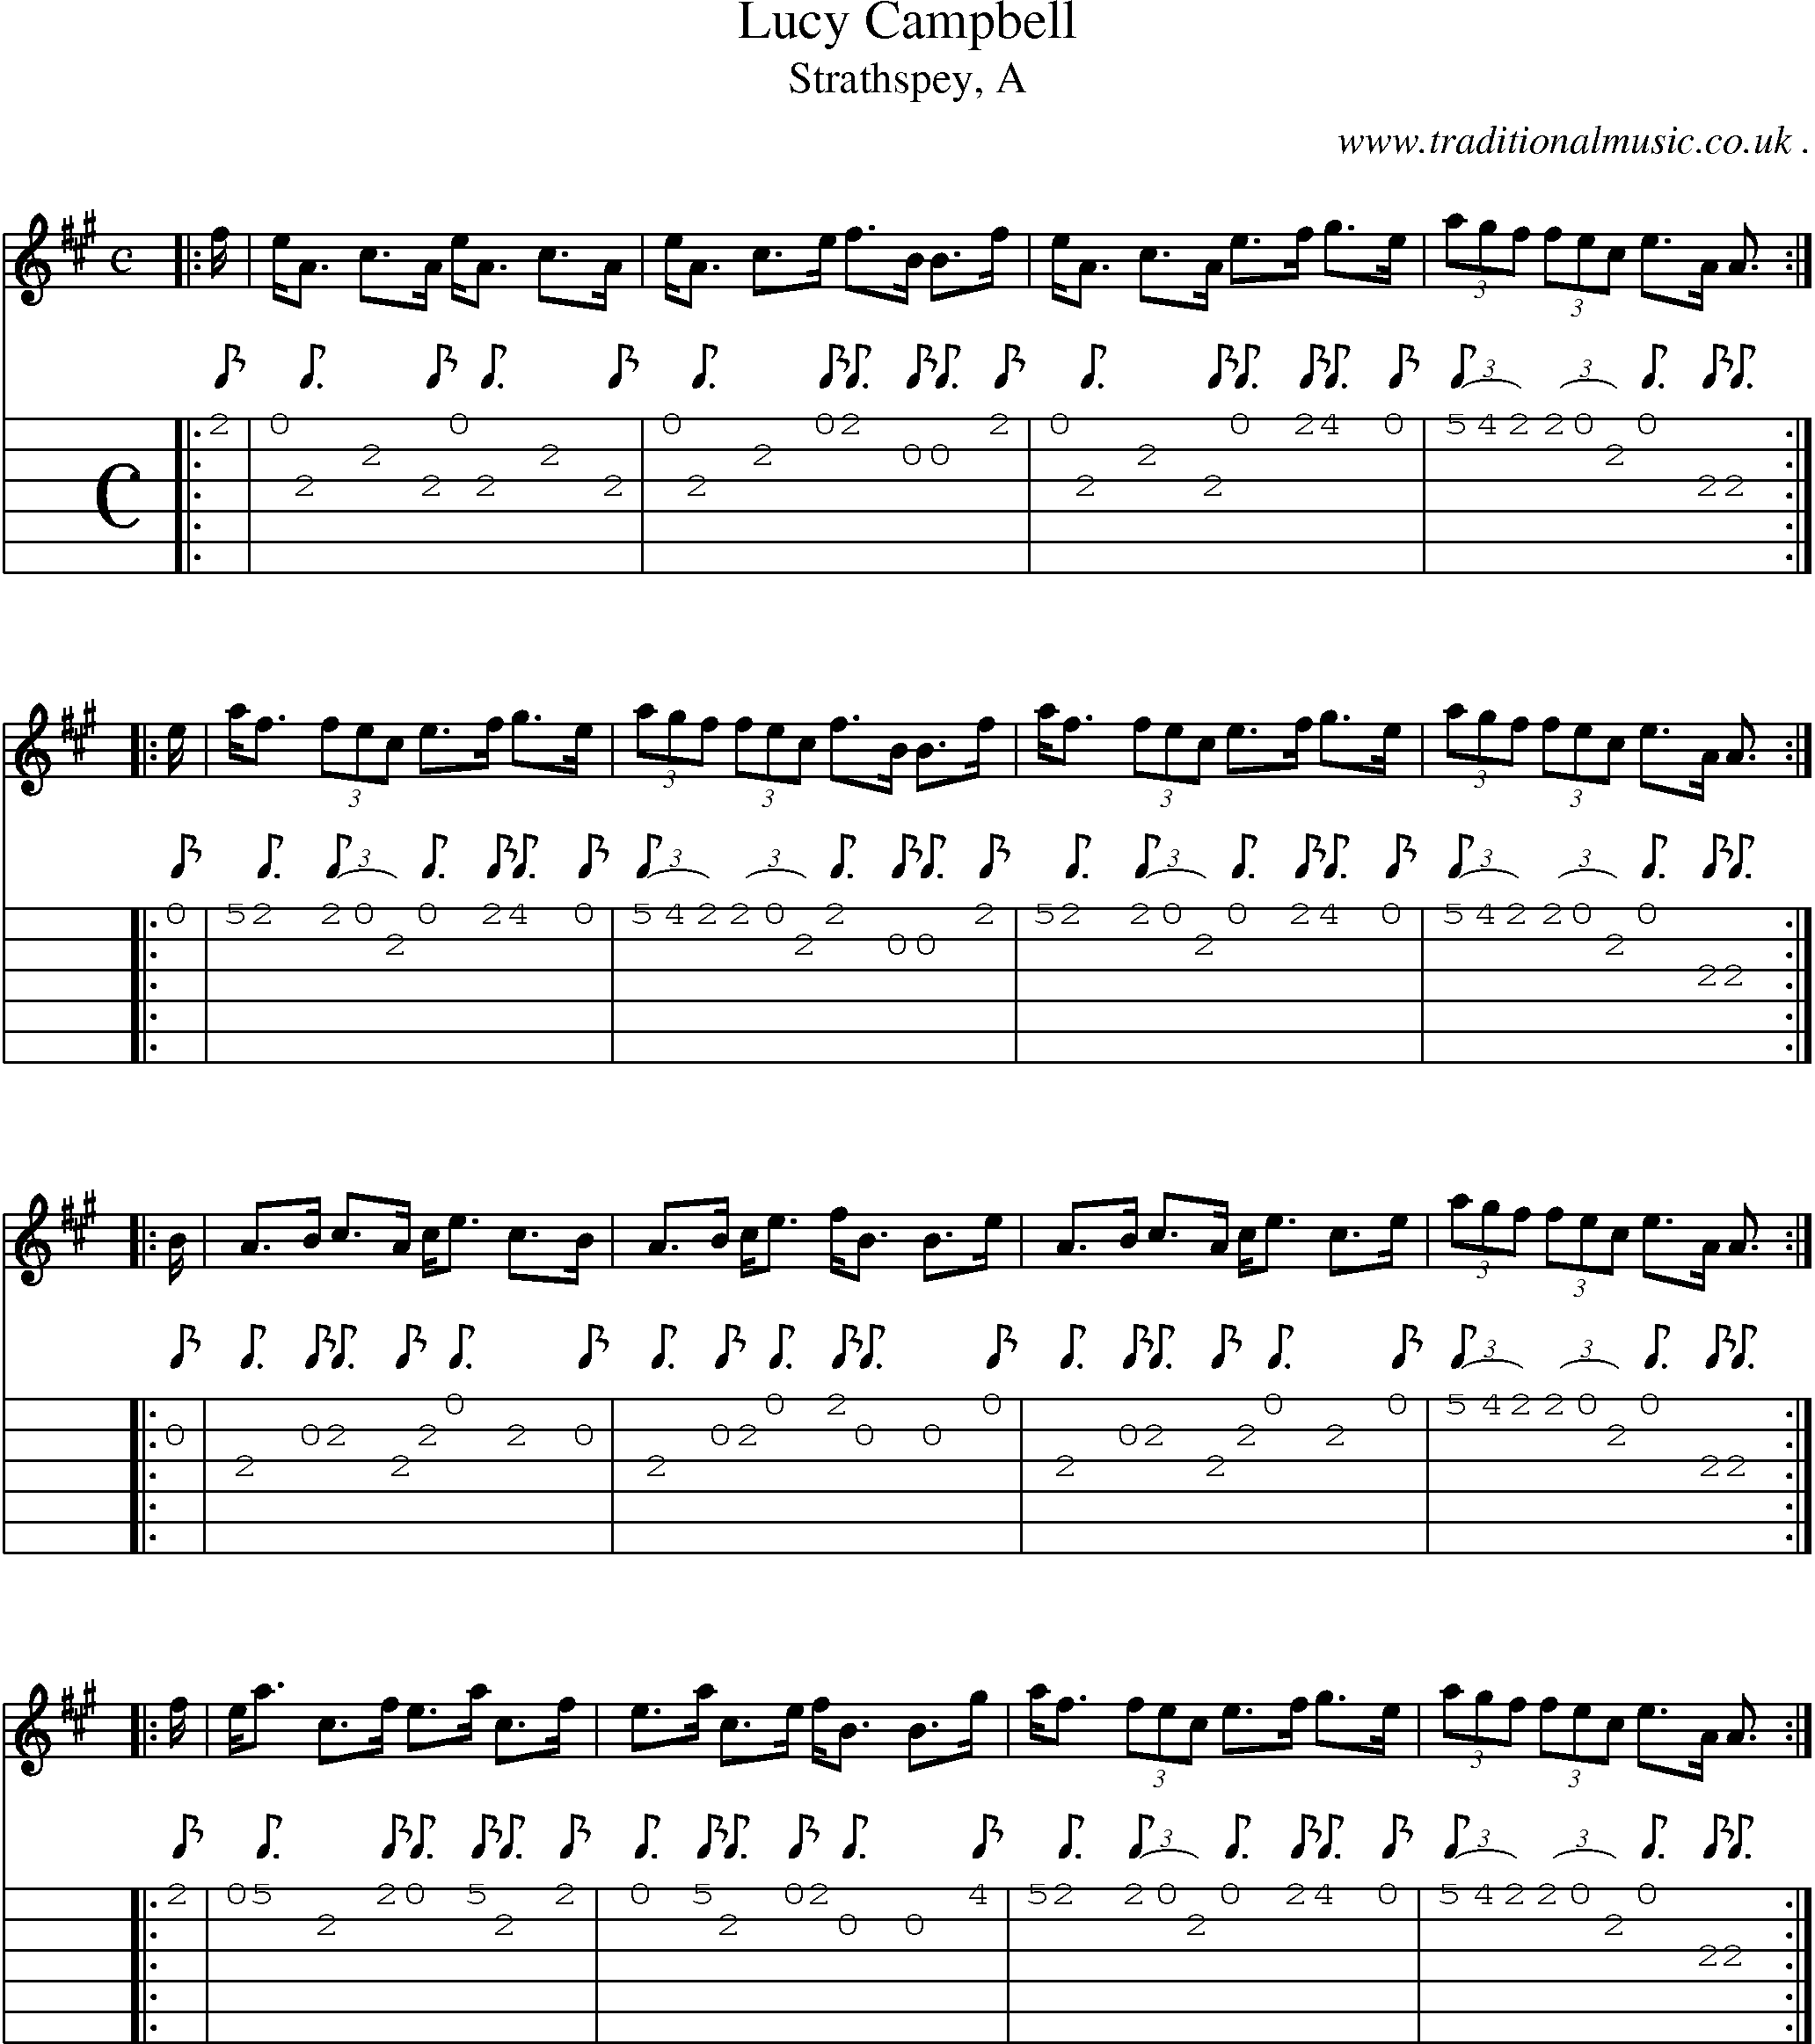 Sheet-music  score, Chords and Guitar Tabs for Lucy Campbell